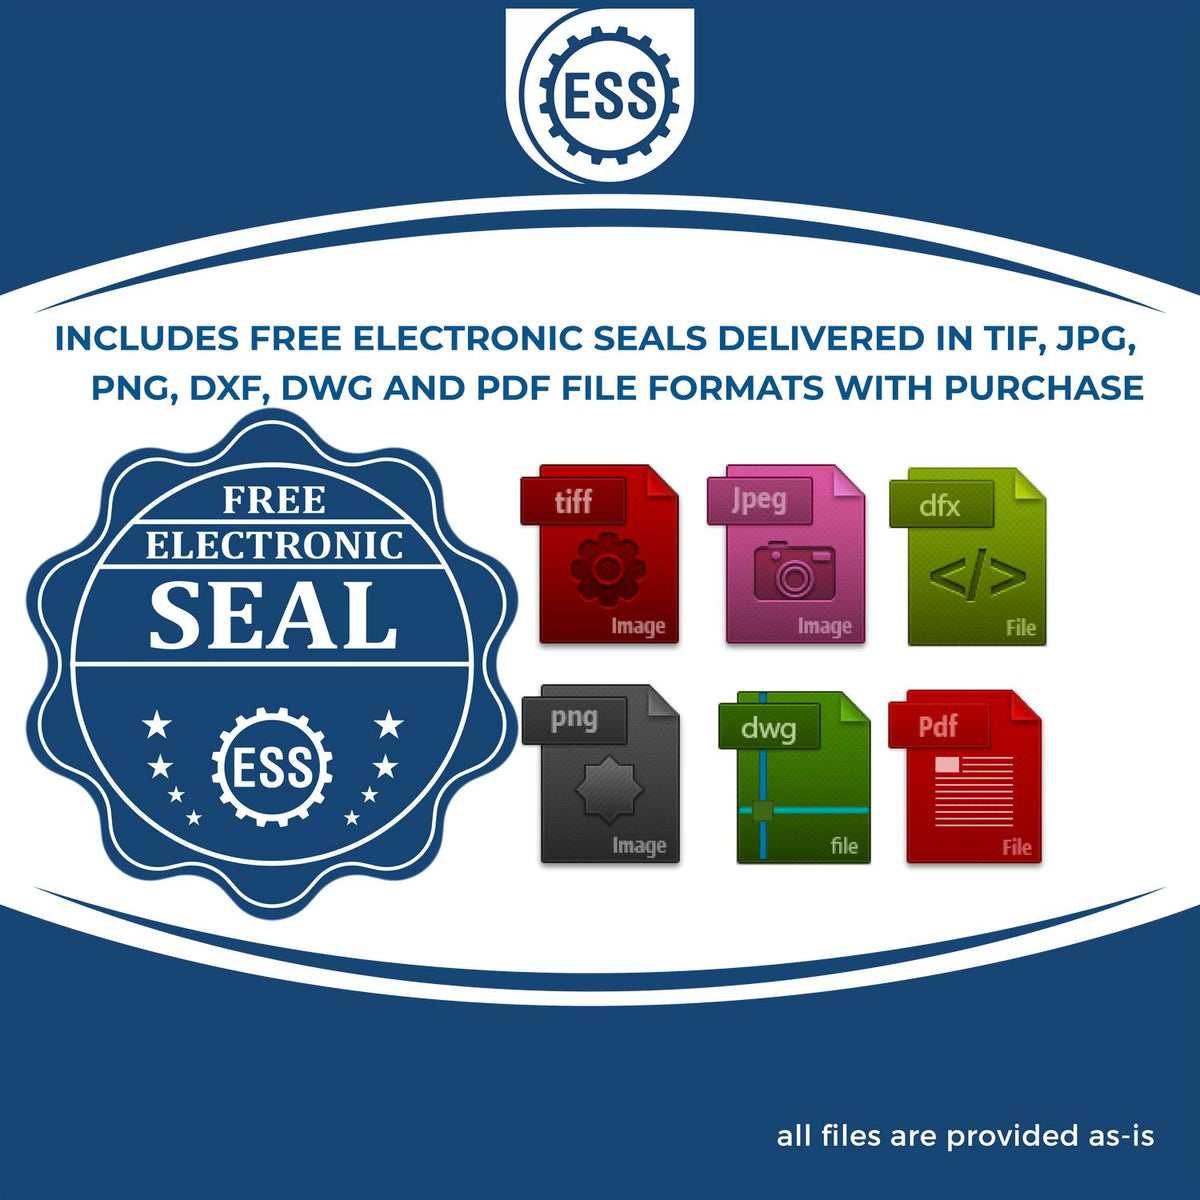 An infographic for the free electronic seal for the Self-Inking Wisconsin PE Stamp illustrating the different file type icons such as DXF, DWG, TIF, JPG and PNG.